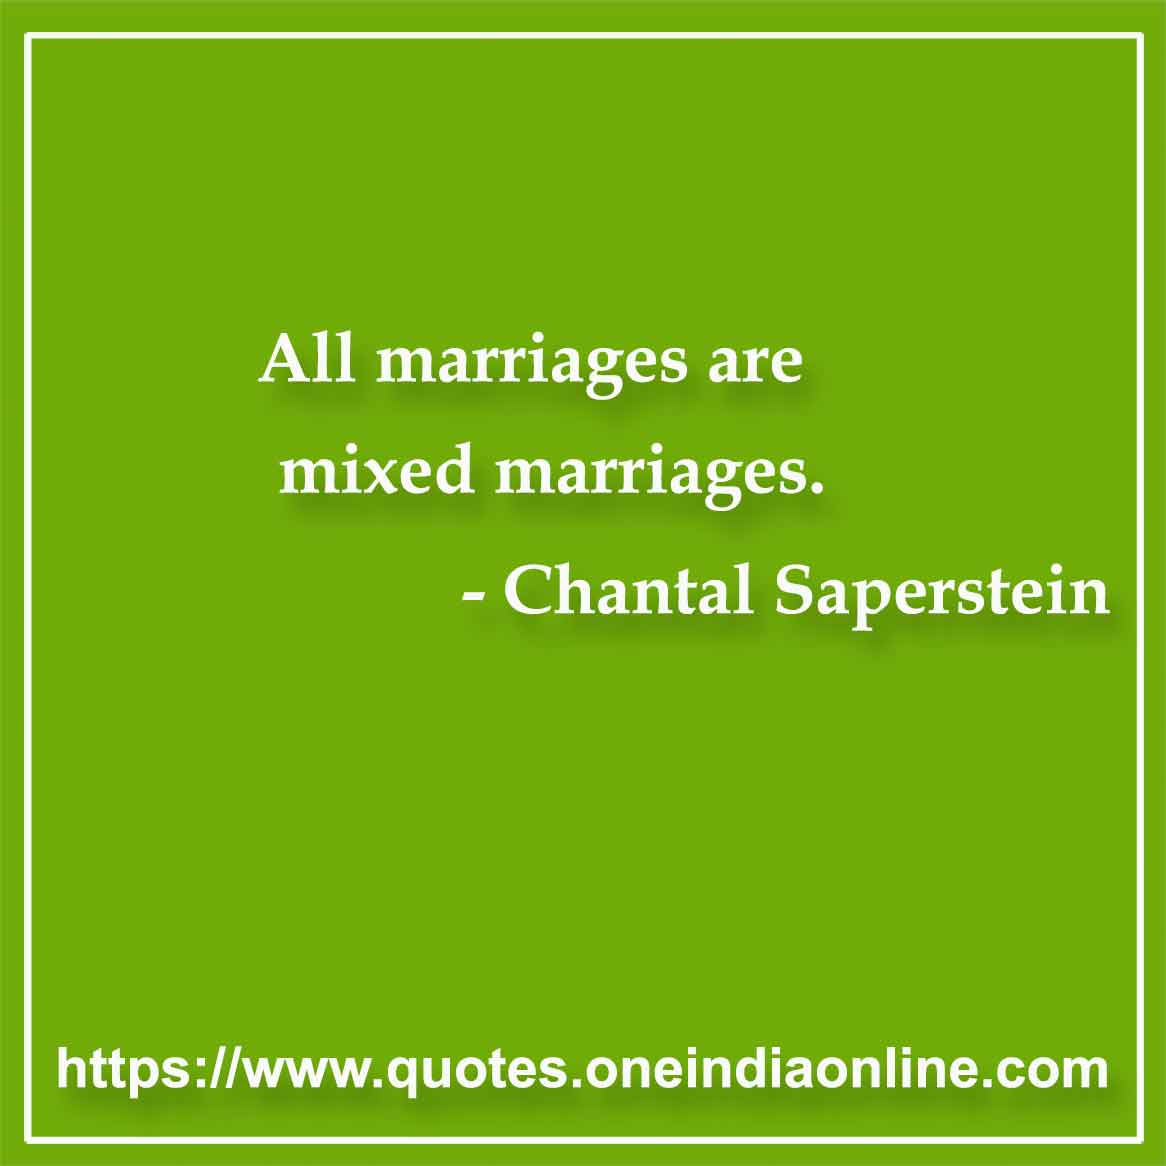 All marriages are mixed marriages.

- Marriage Quotes by Chantal Saperstein 